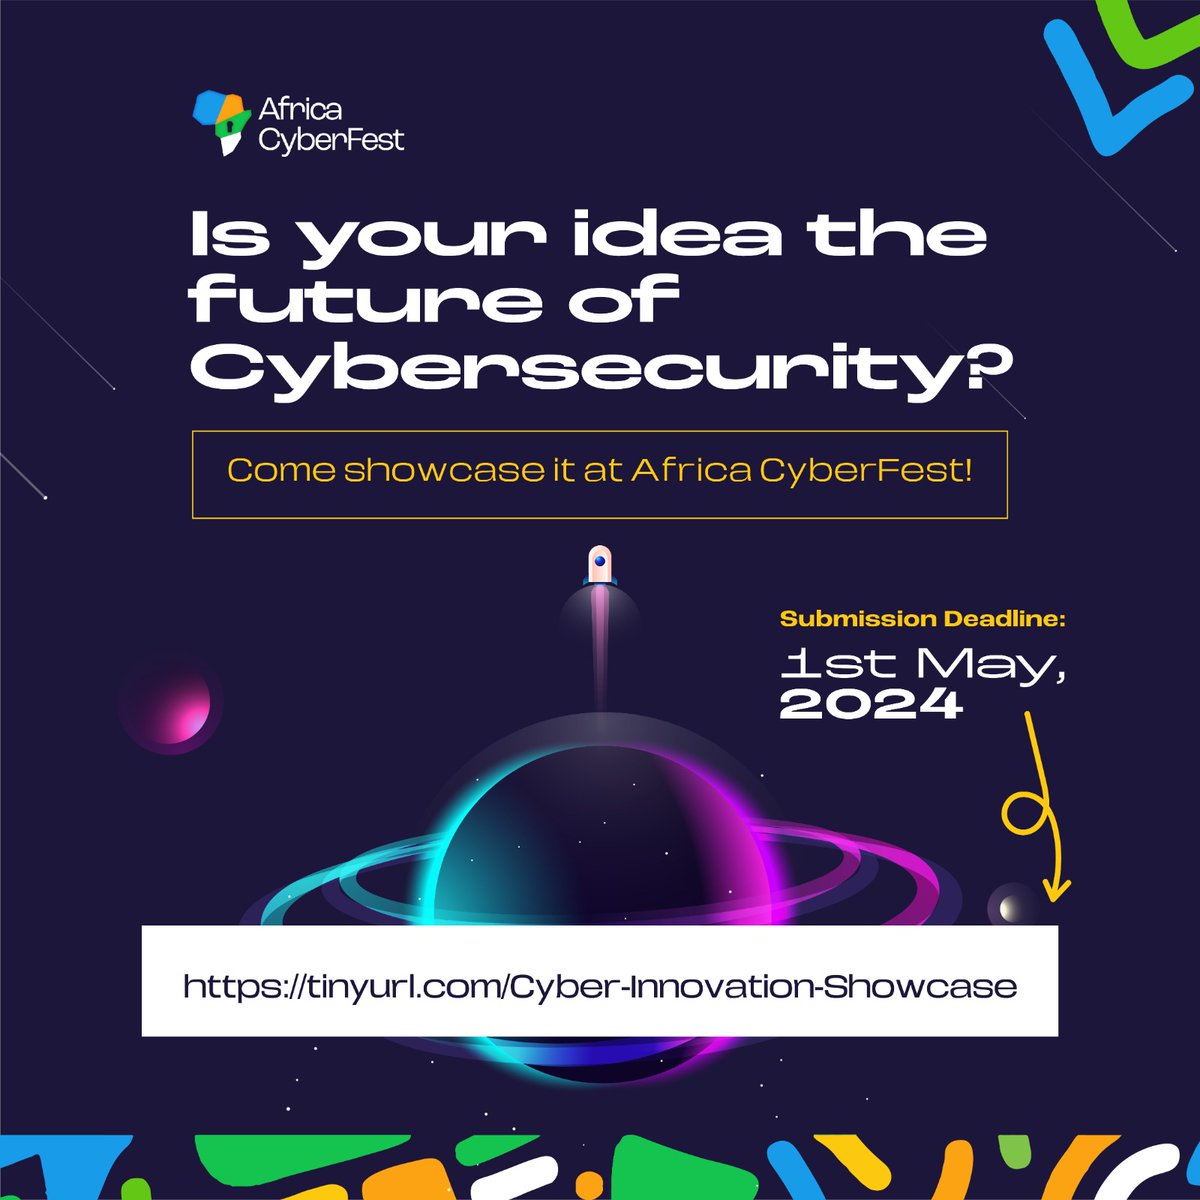 Think your idea is the next cybersecurity game-changer? Showcase your big idea or product at #CyberFest, get constructive crticism, gain recognition, and who knows, maybe a recruiter could snag you up! 😉 Register your idea at: tinyurl.com/Cyber-Innovati… Deadline: 1st May, 2024.